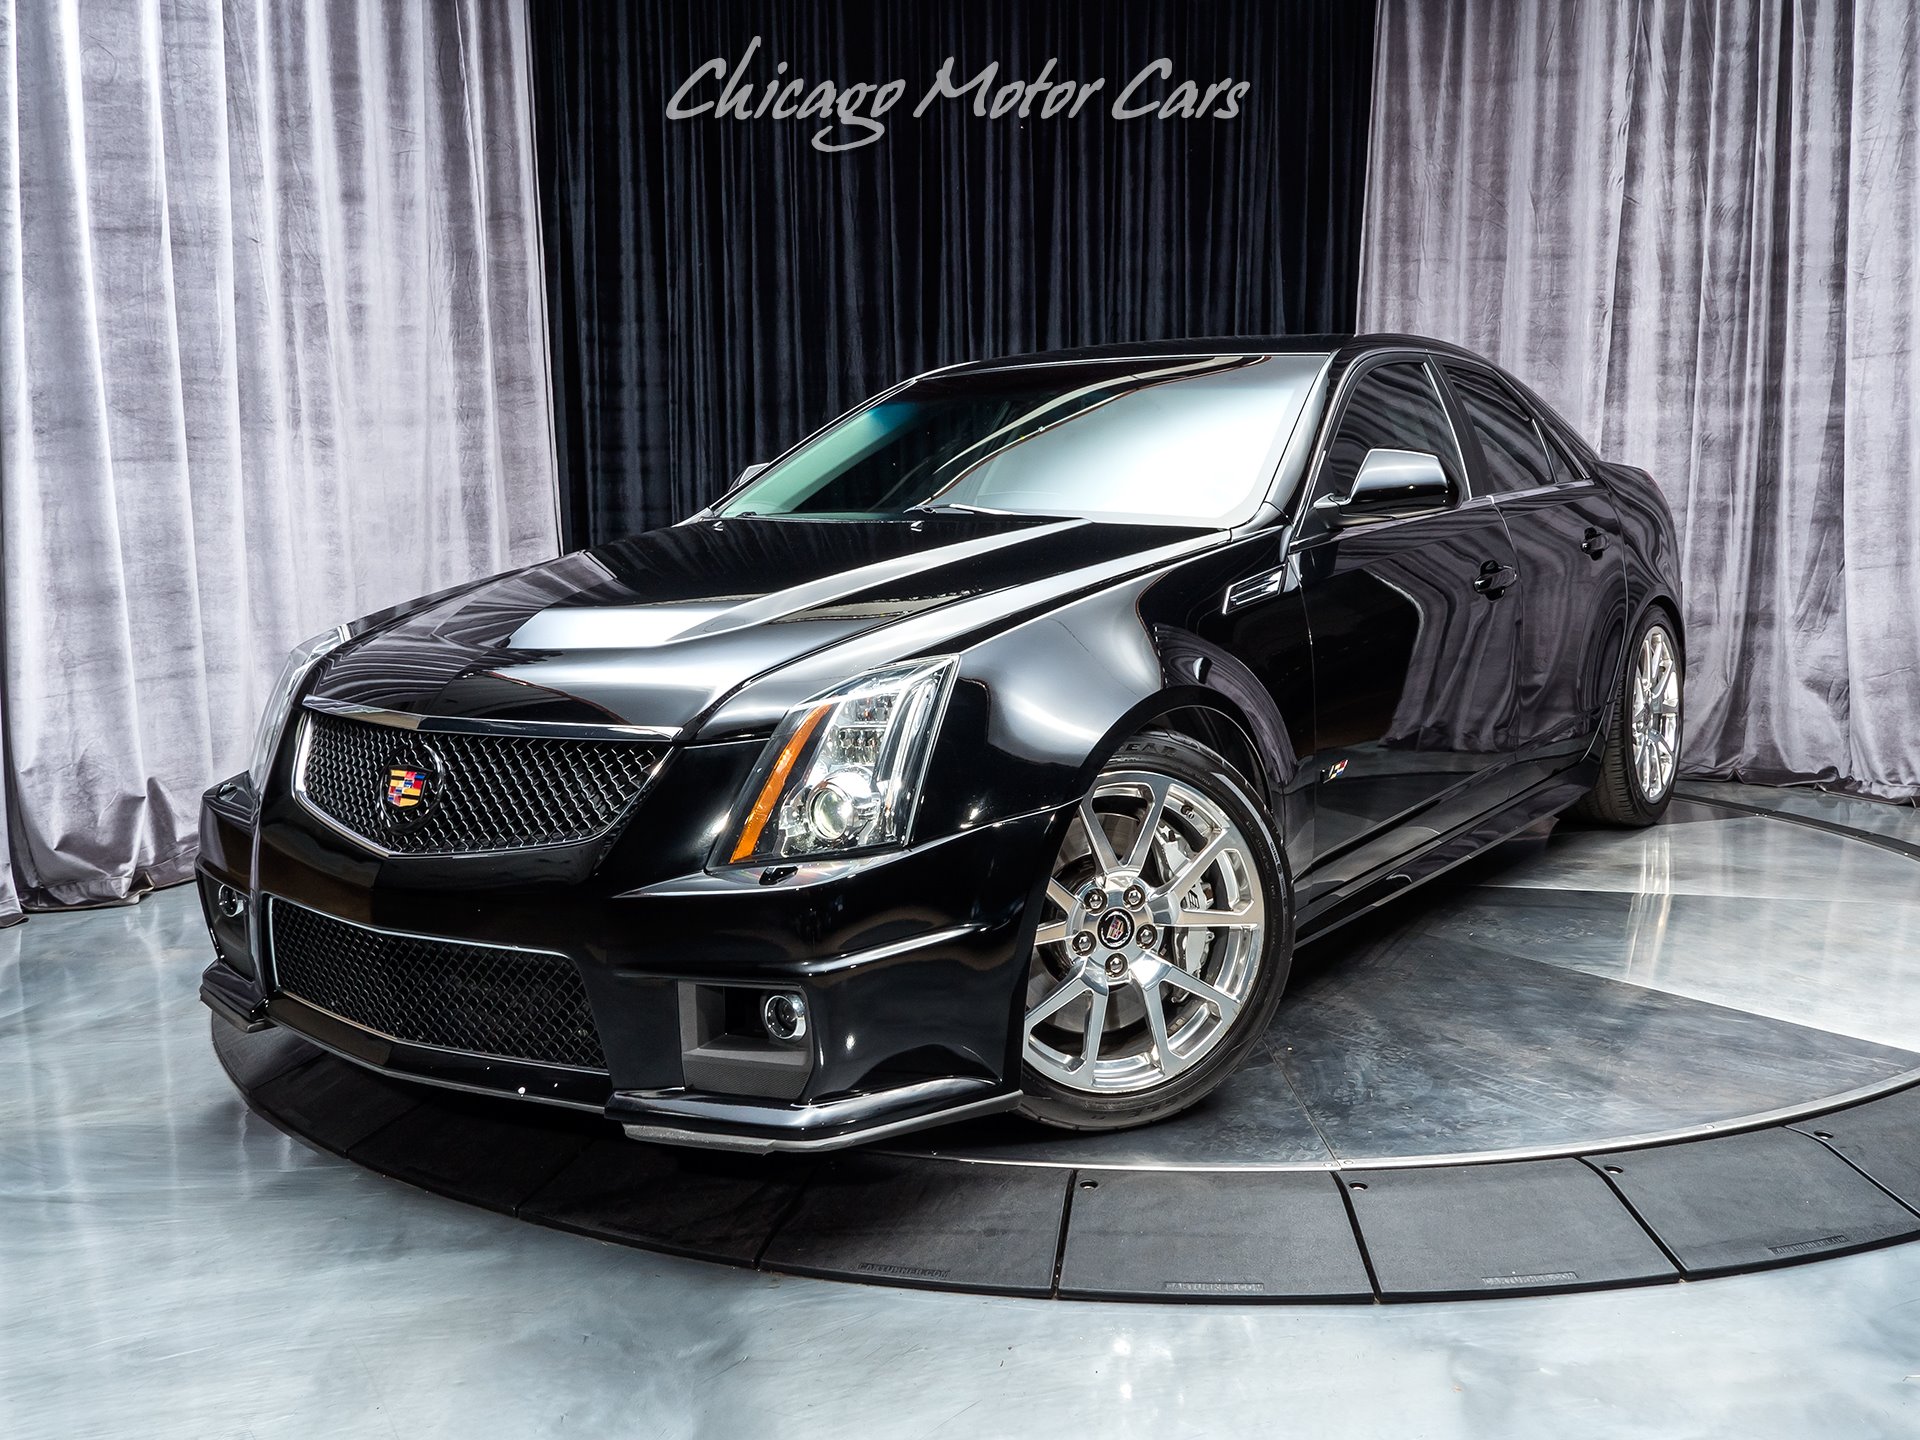 Used-2010-Cadillac-CTS-V-Sedan-with-Corsa-Exhaust